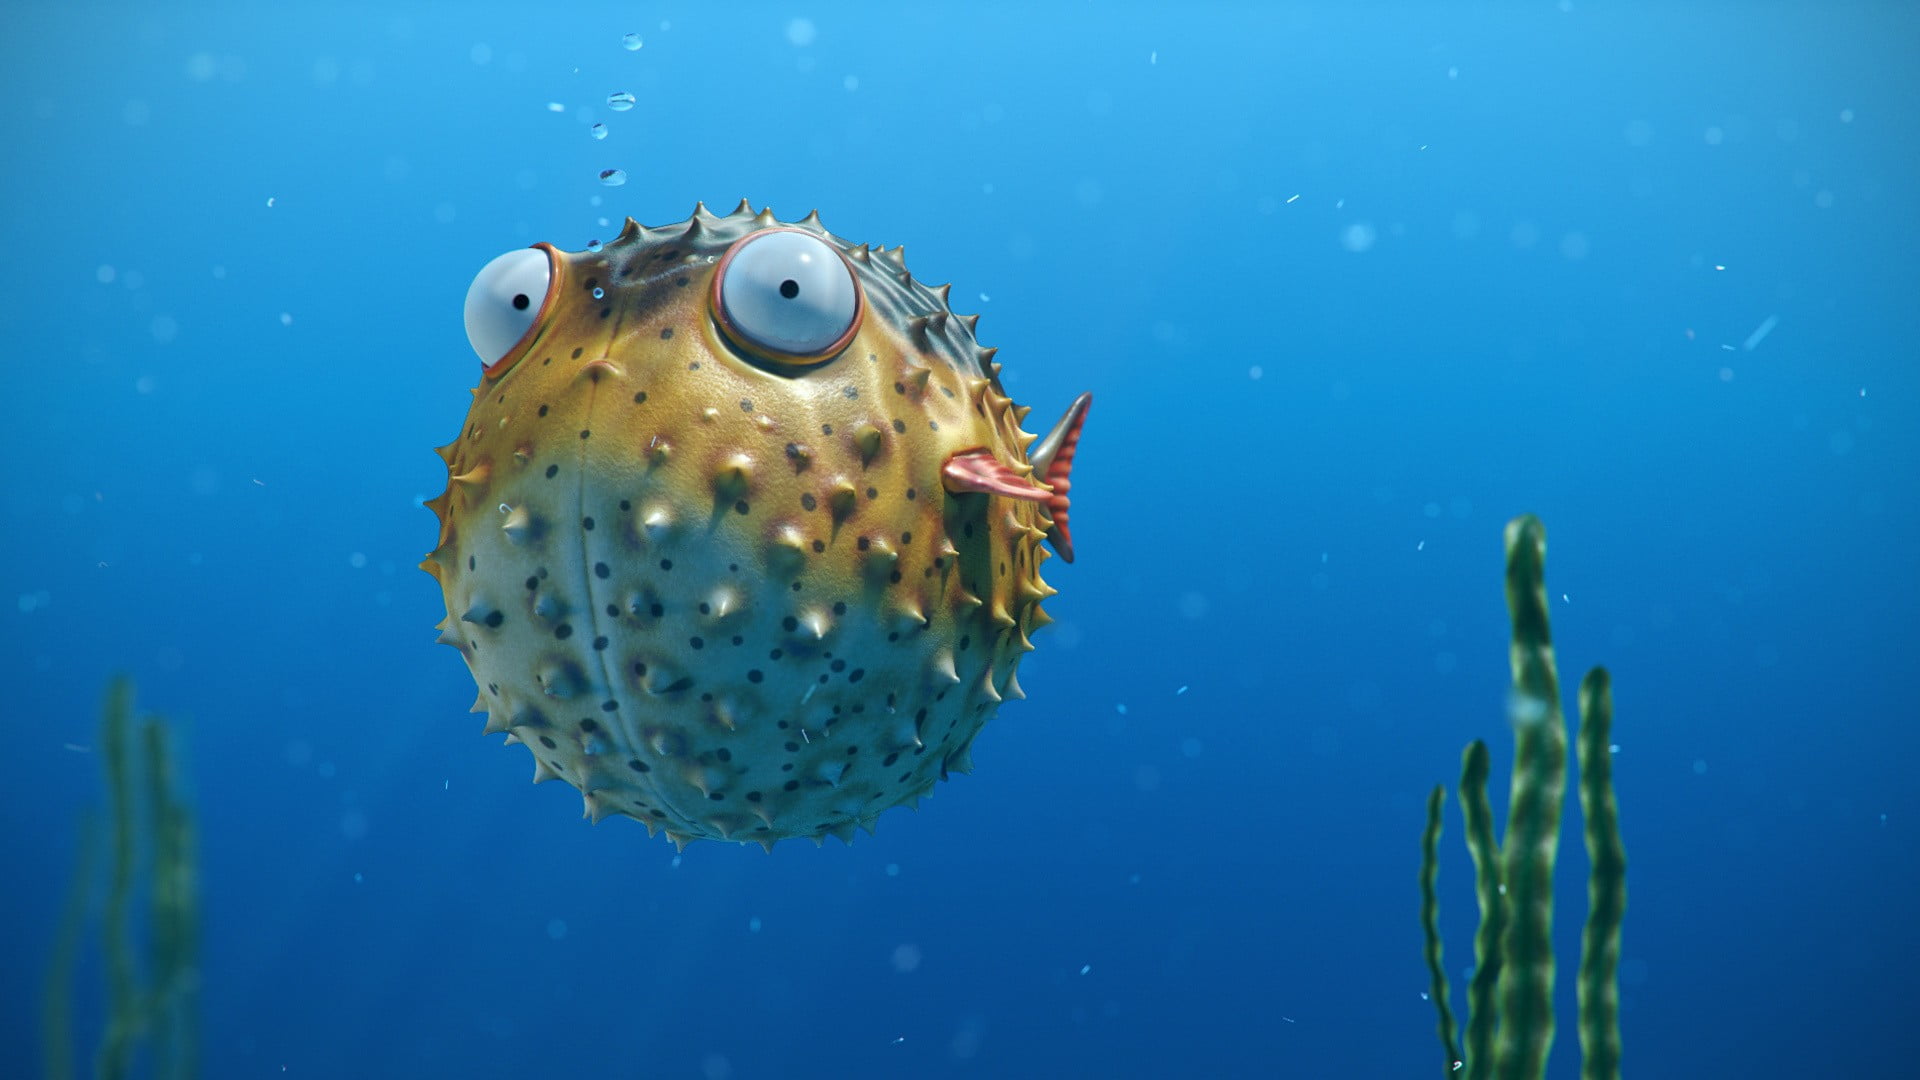 Share more than 80 puffer fish wallpaper latest - in.cdgdbentre